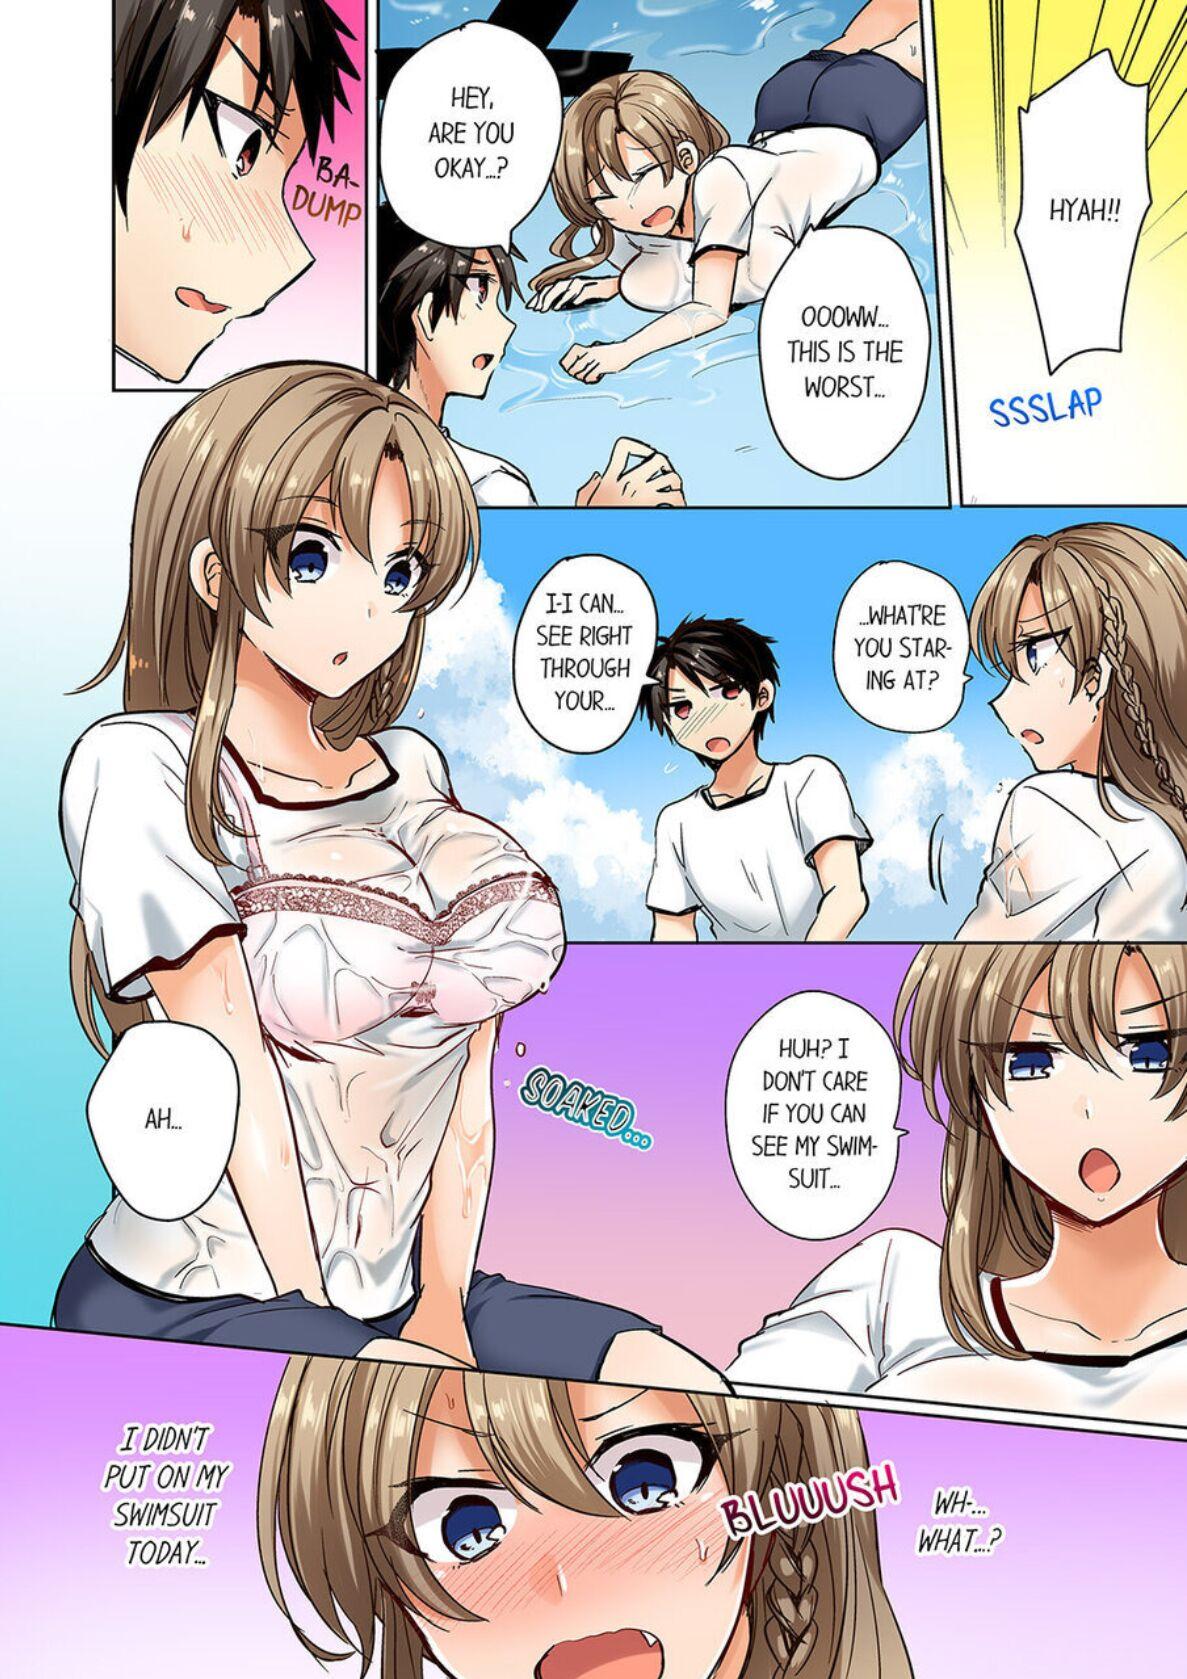 Maid My Swimsuit Slipped... And it went in!? A Mixed Synchronized Swimming Club with More Than Just Nip Slips in Store! ~ 1 Pregnant - Page 8